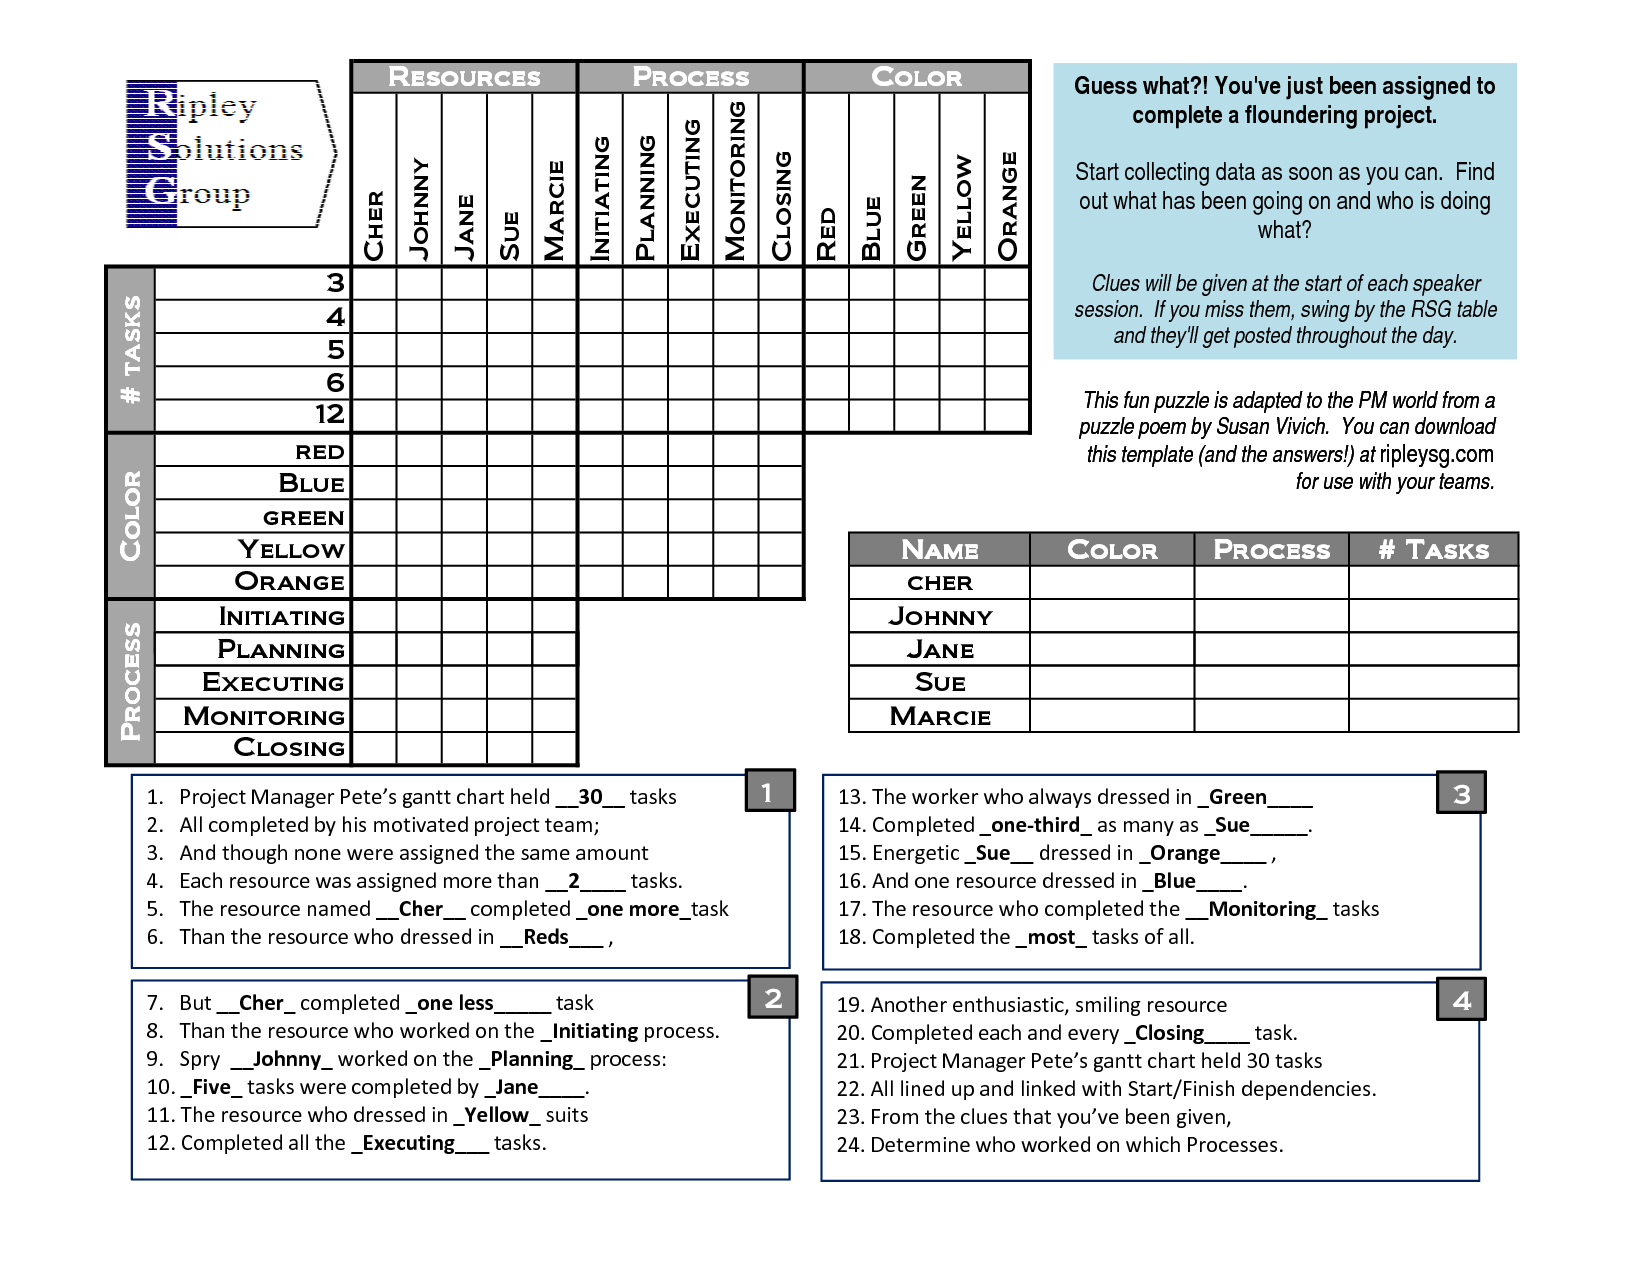 printable logic puzzles for 6th graders printable